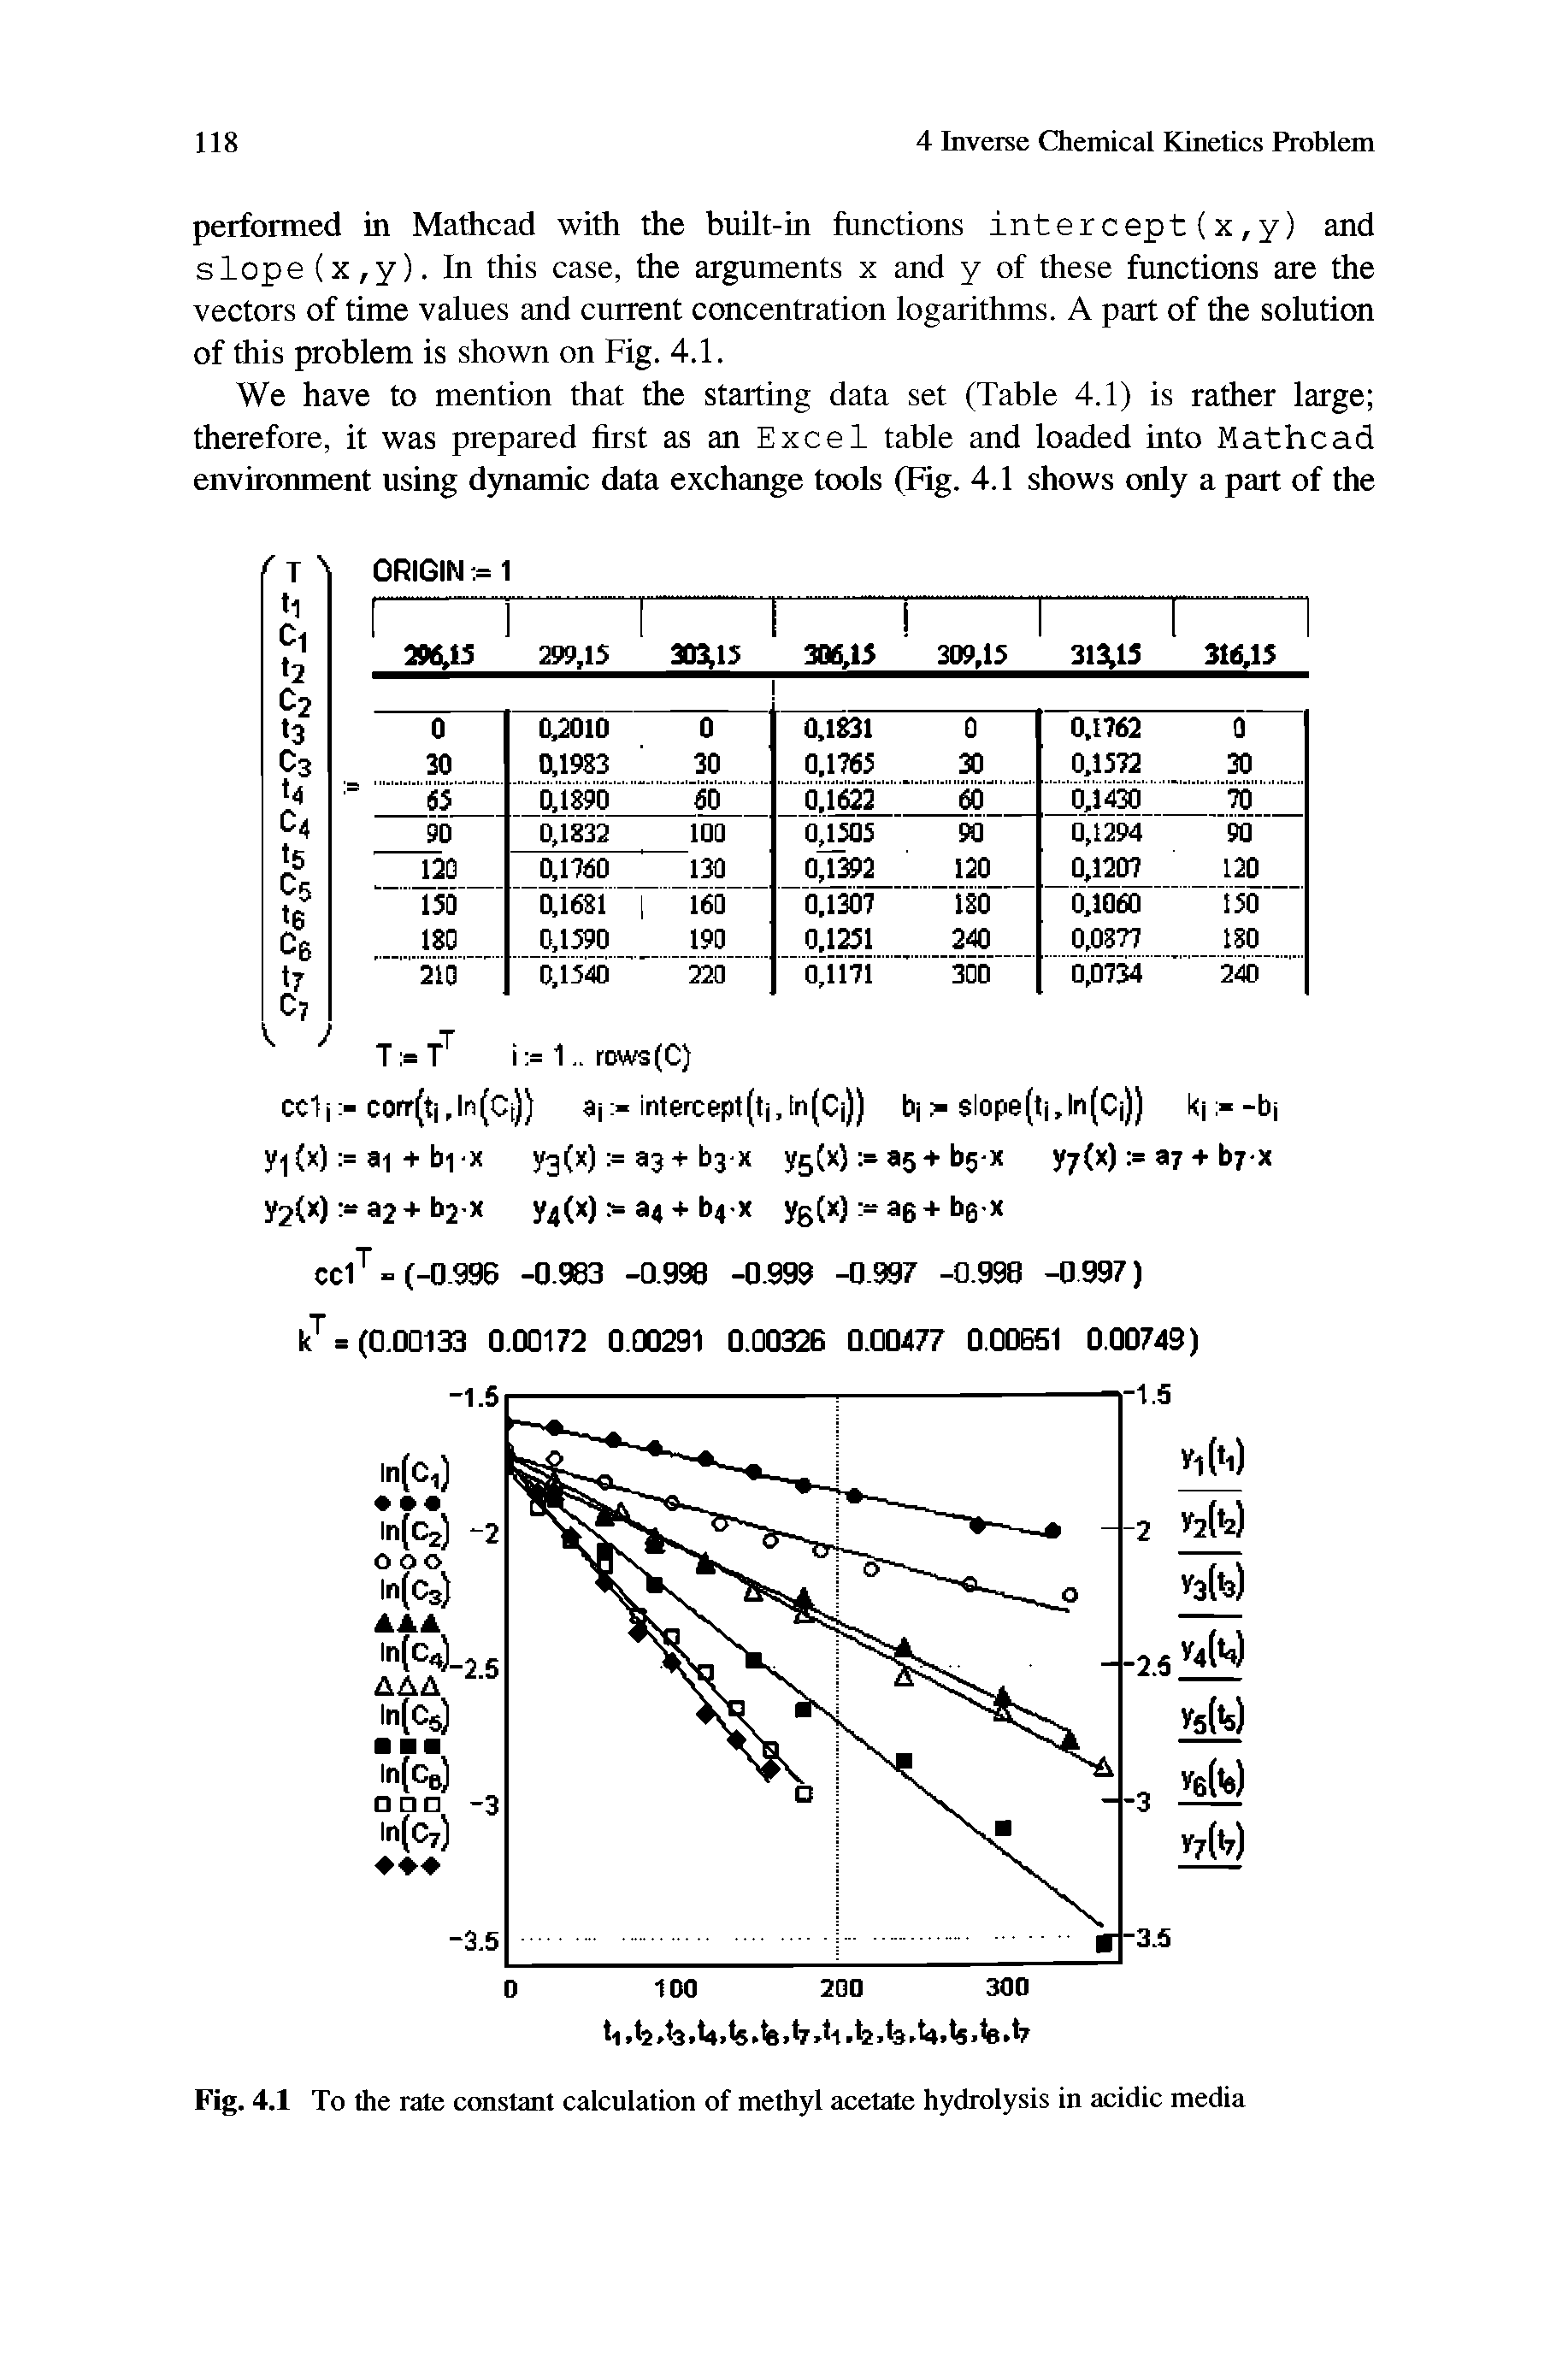 Fig. 4.1 To the rate constant calculation of methyl acetate hydrolysis in acidic media...